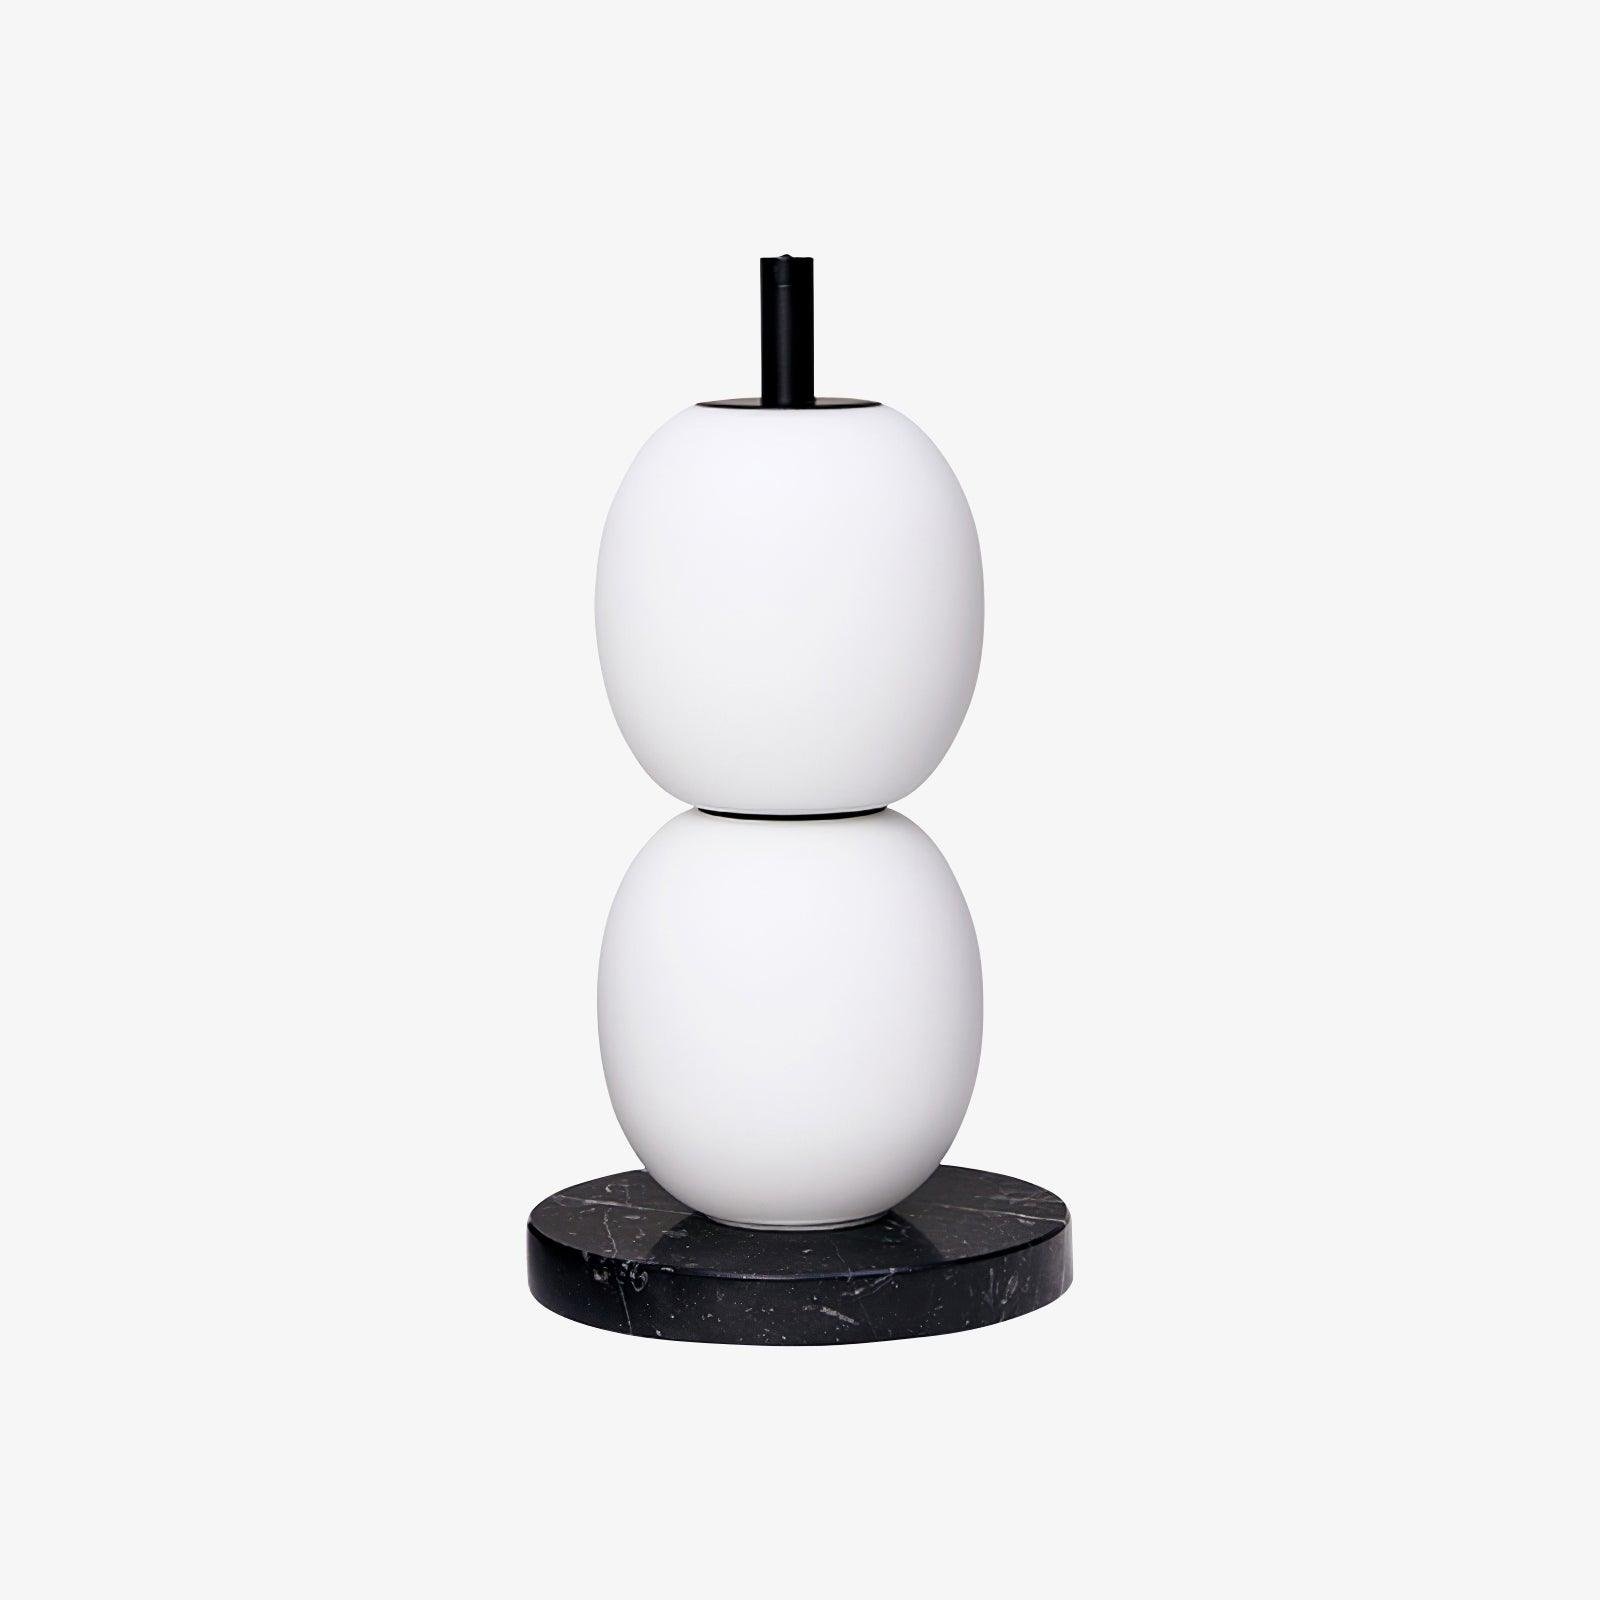 Table lamp with a UK plug, featuring a diameter of 30cm and a height of 50cm, designed in white with candied haws.